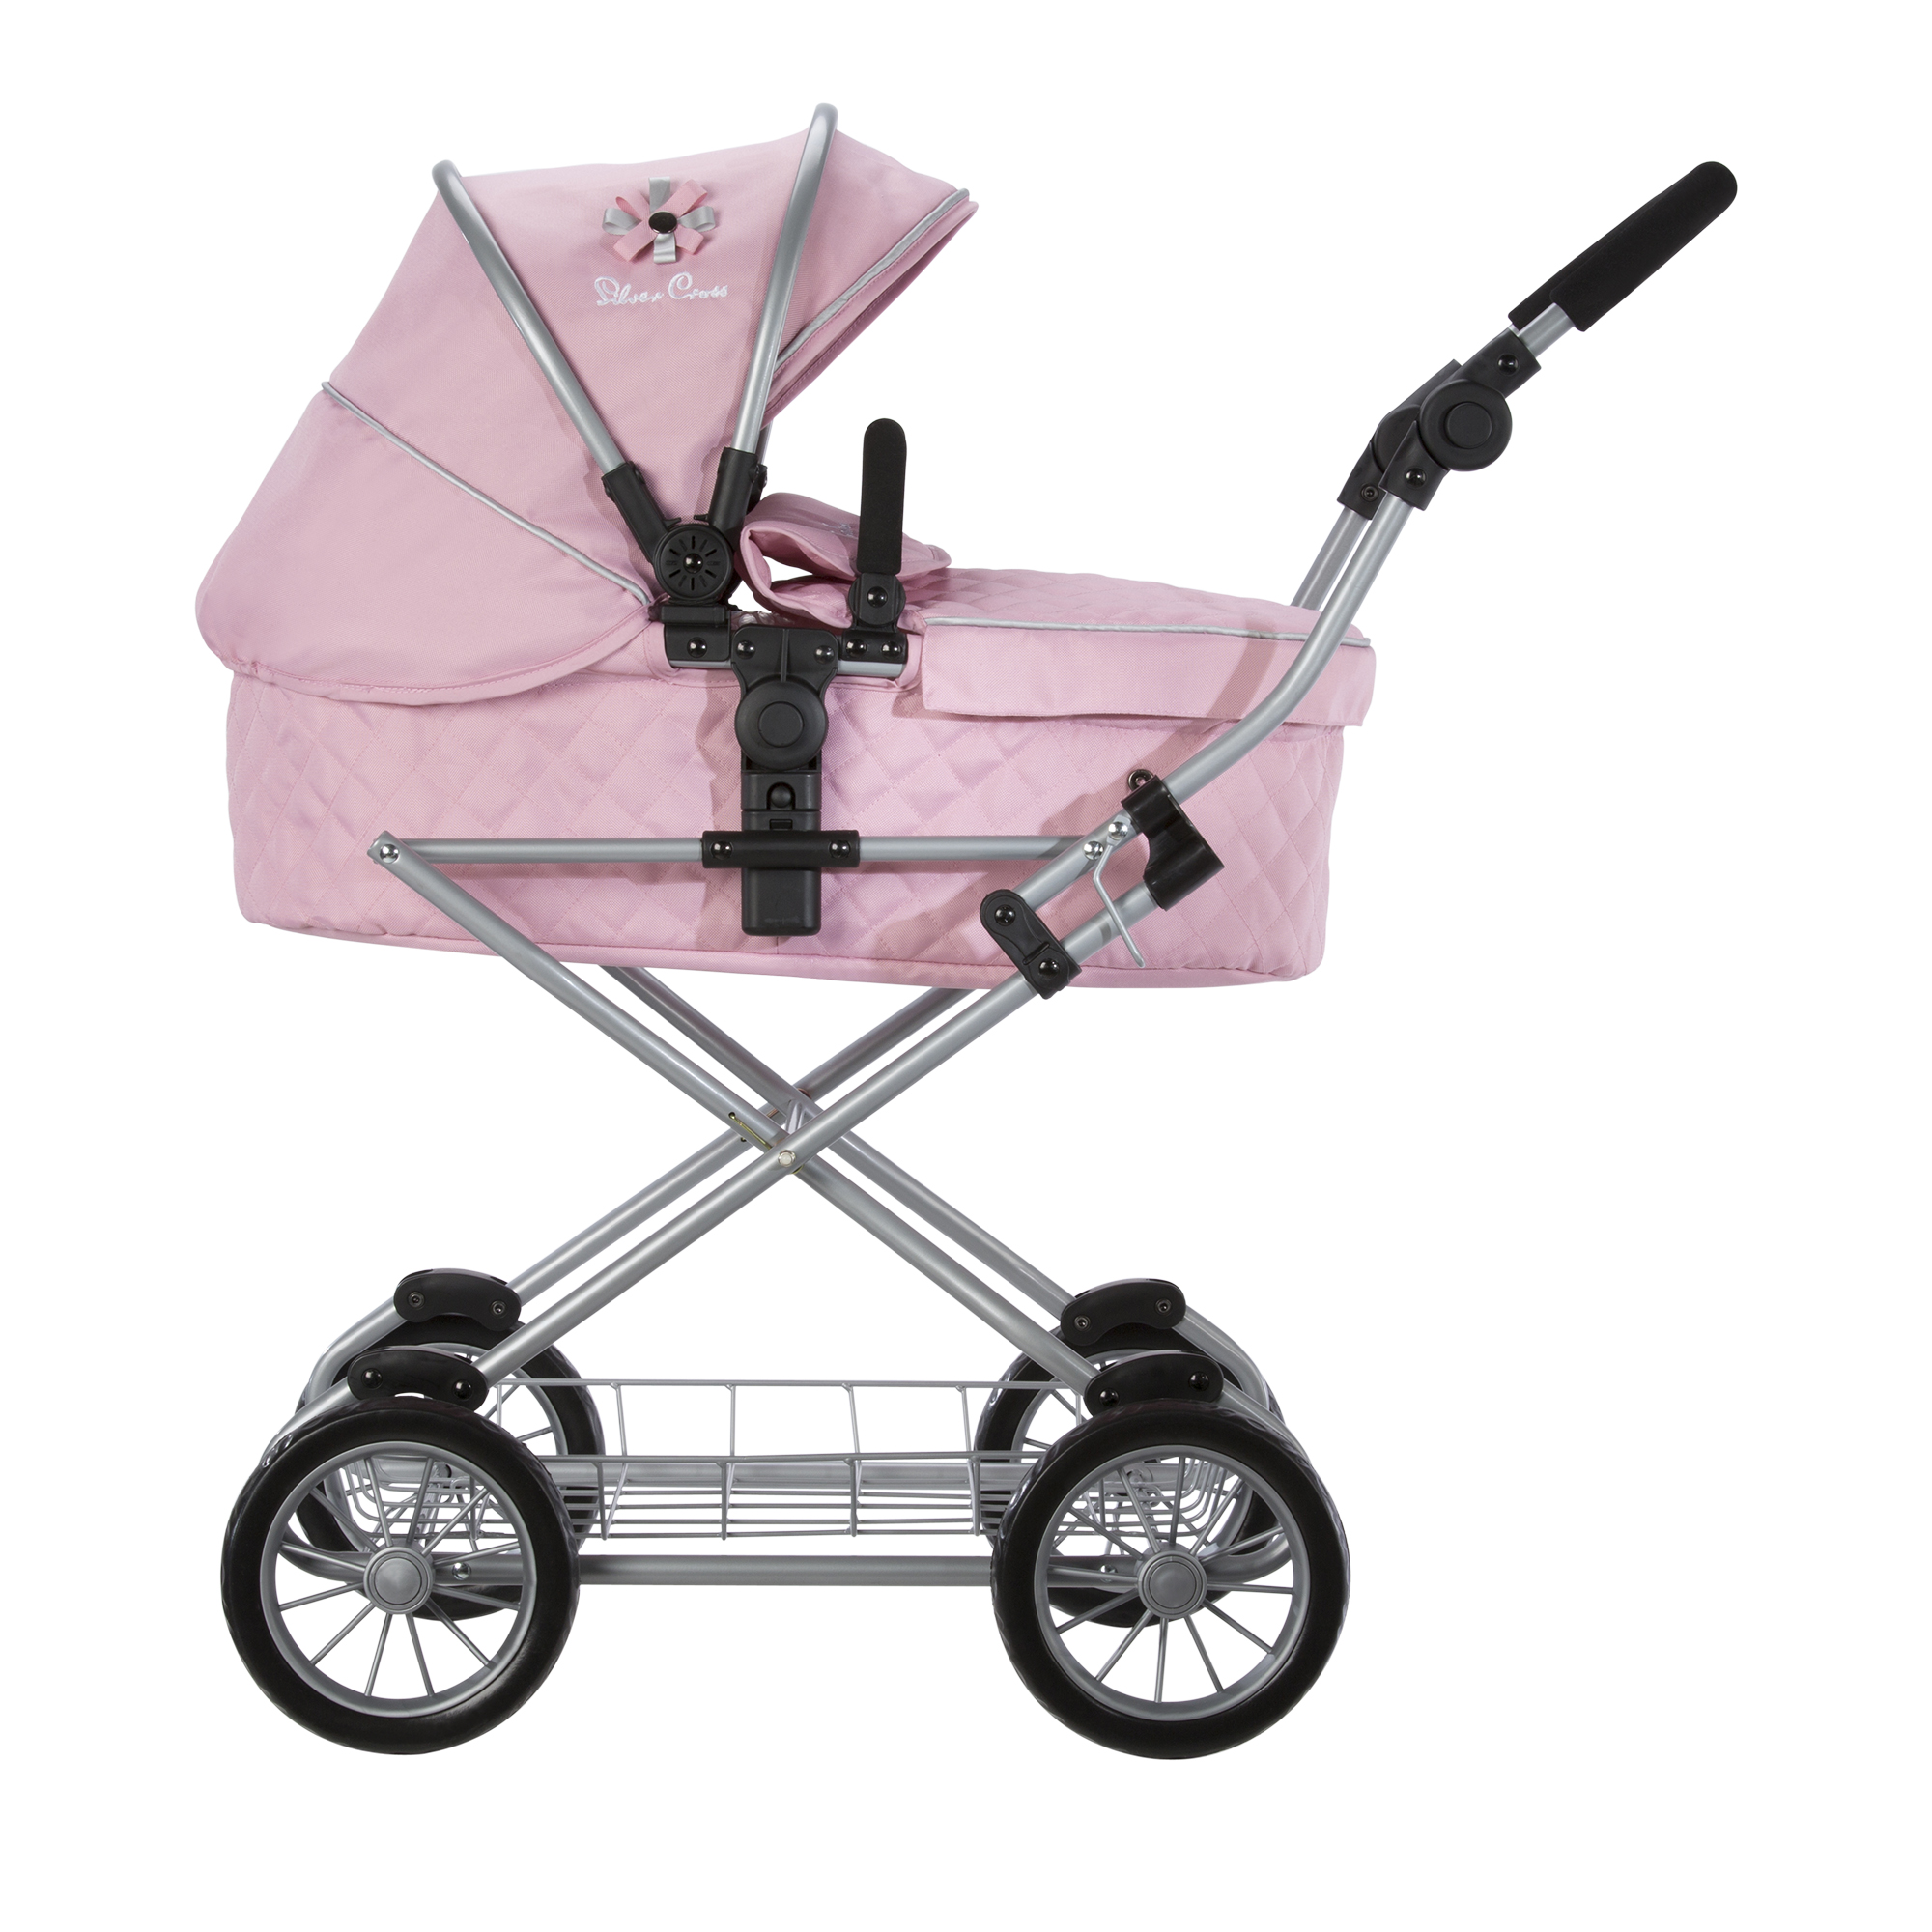 dolls double buggy for 8 year old